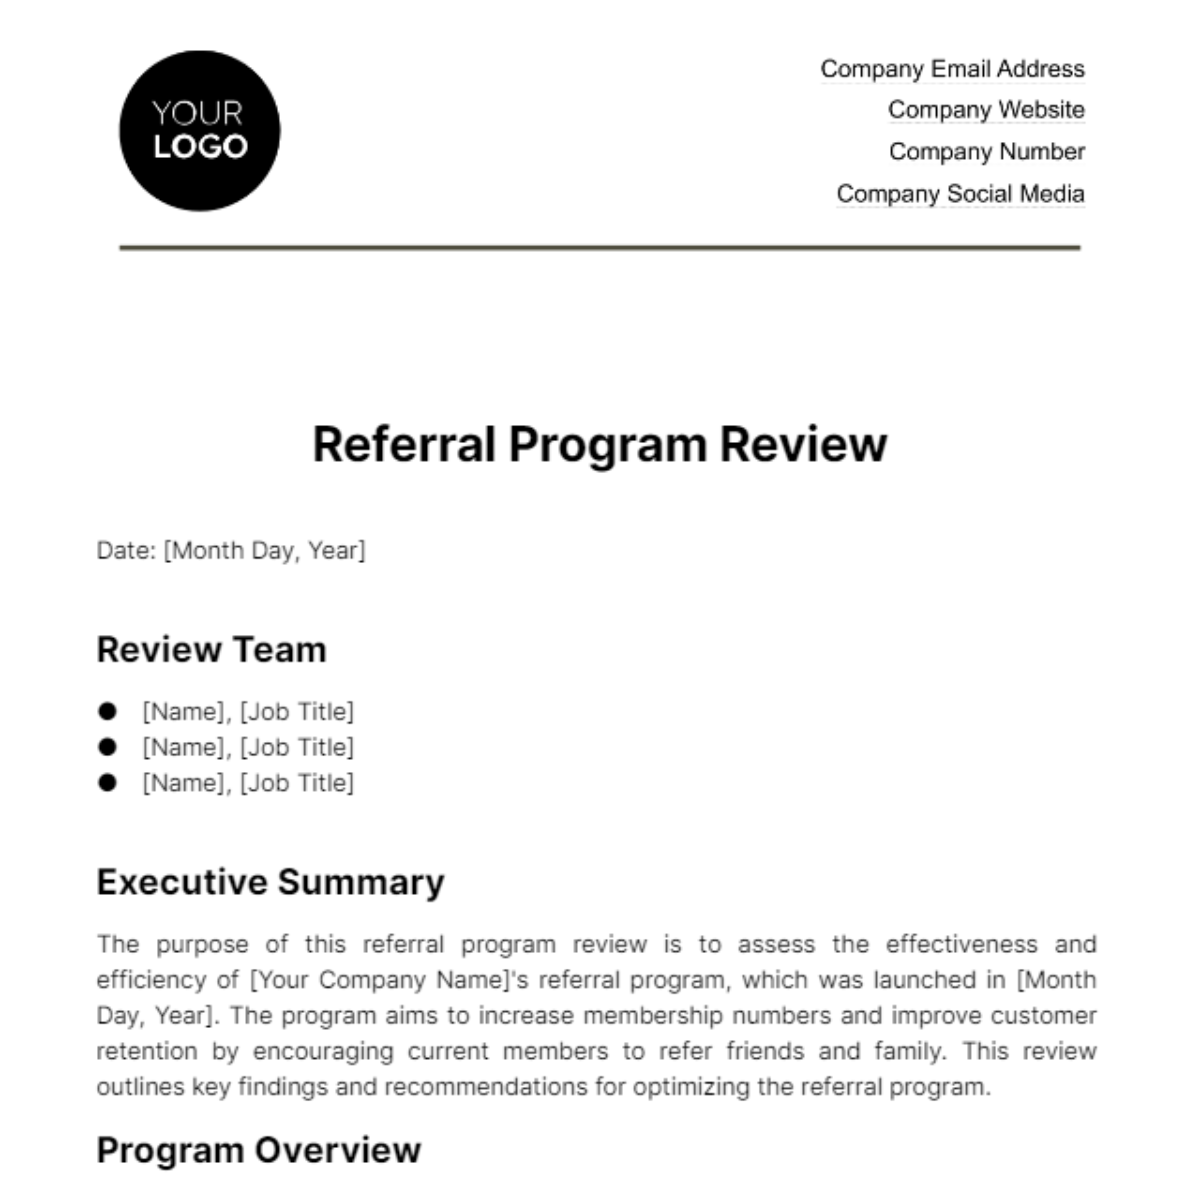 Free Referral Program Review HR Template